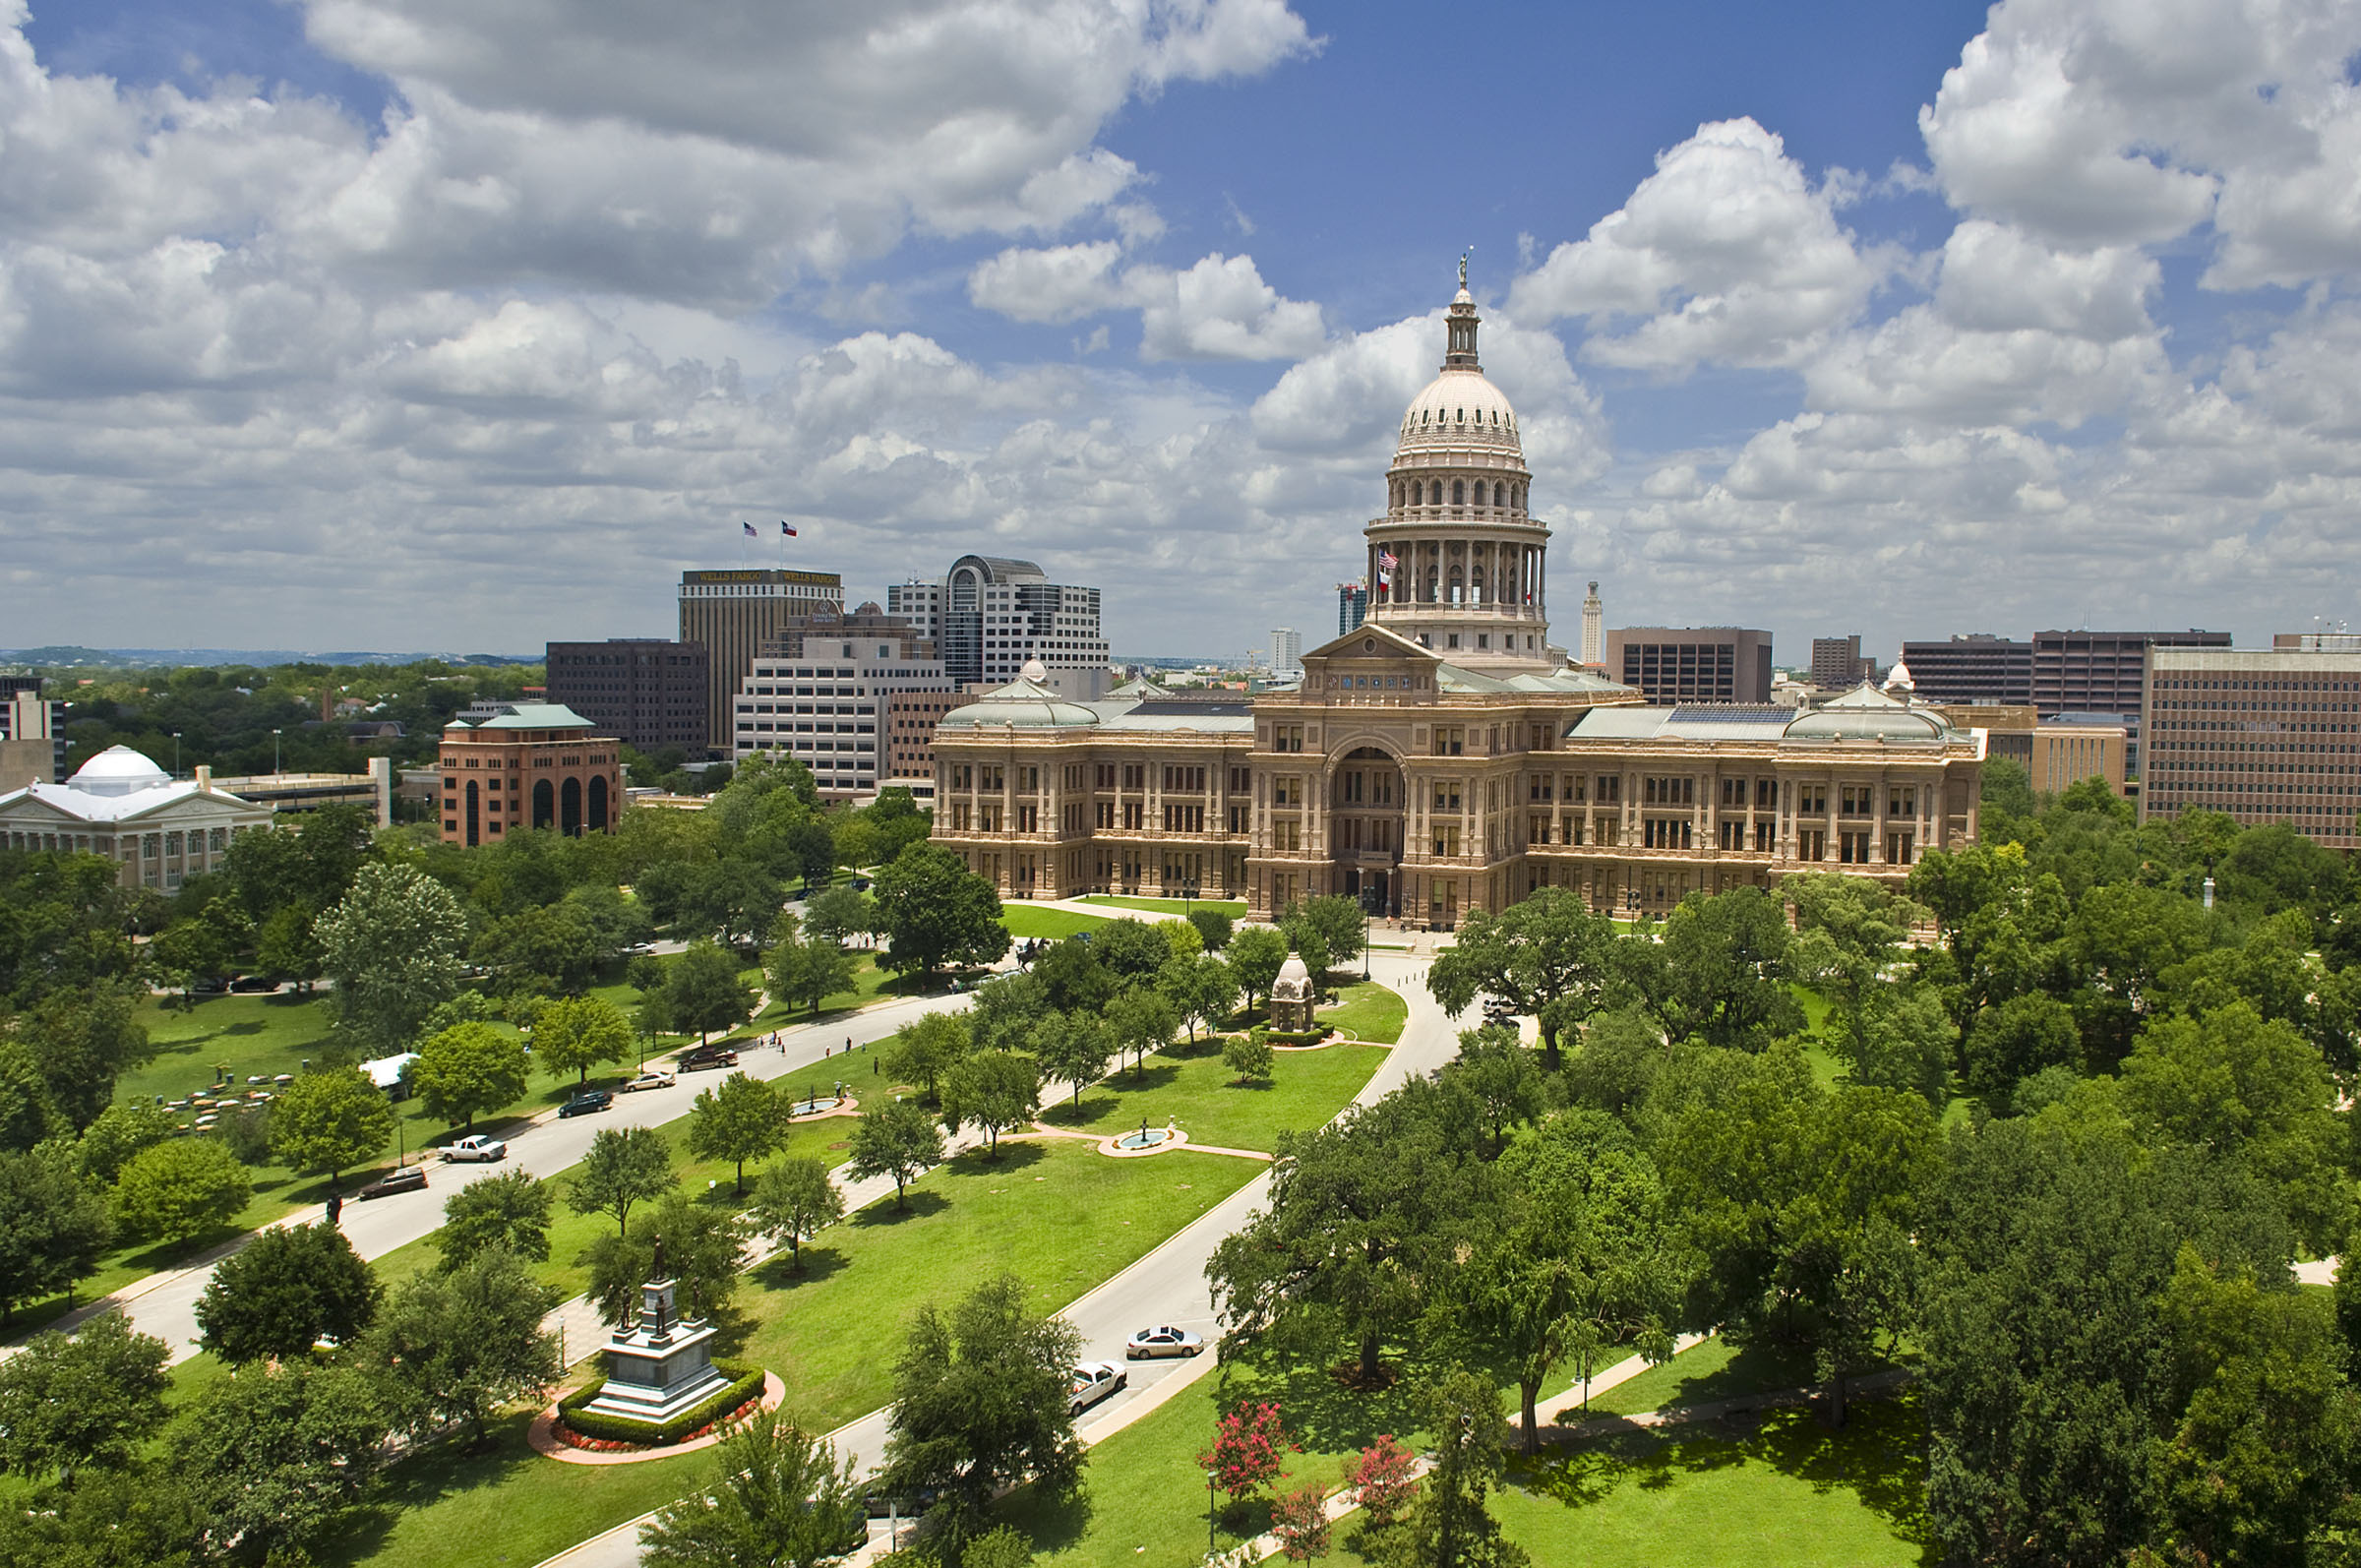 Lush green trees and grass line the driveways and sidewalks leading toward the capitol building in downtown Austin, Texas. The UT Tower is also visible in the background